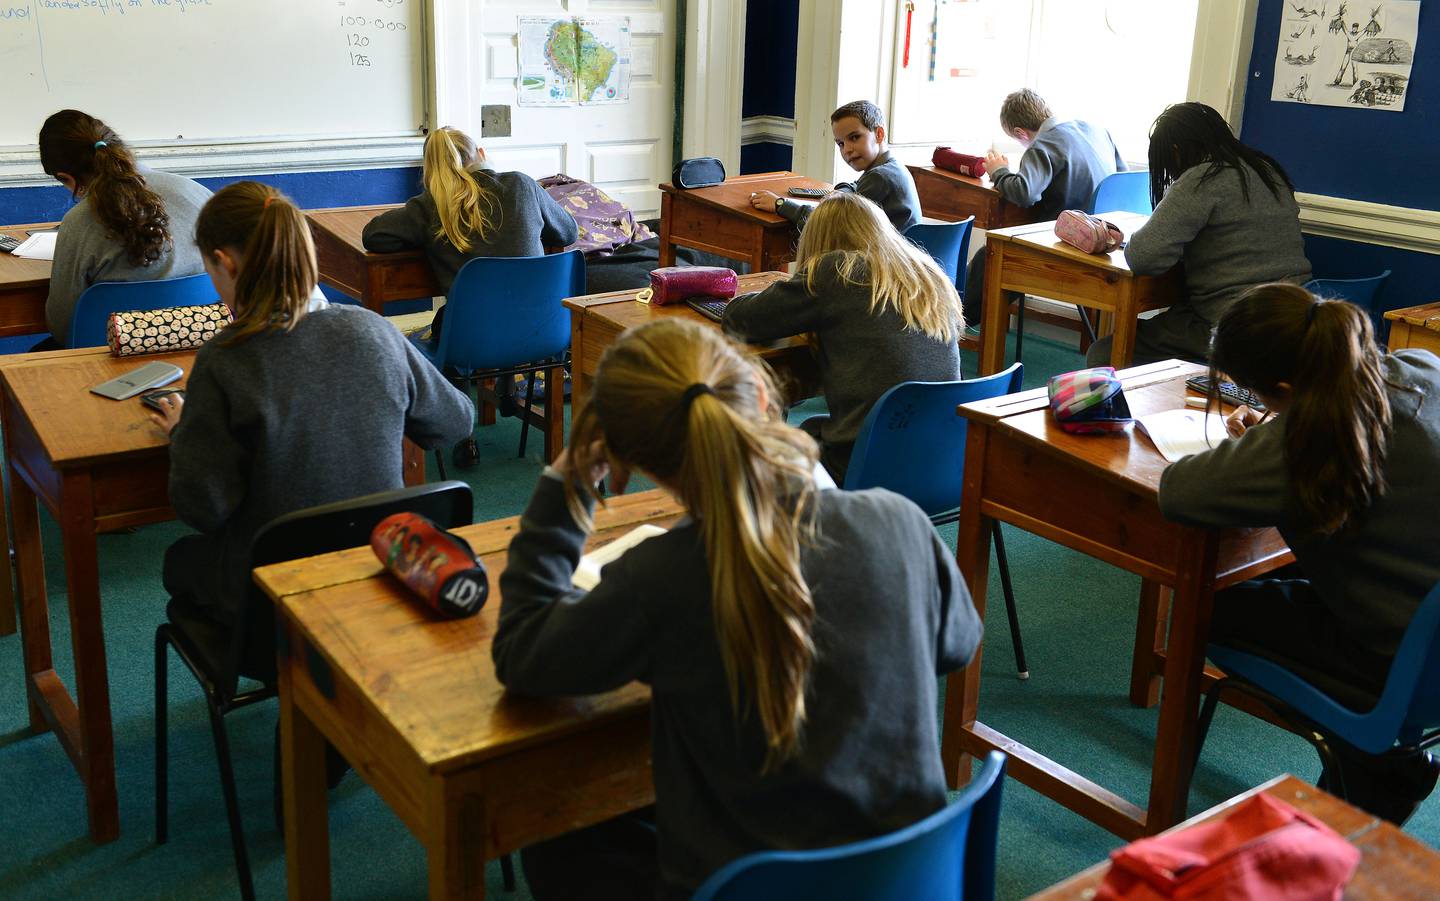 Date:15/04/2013 - Education -  Students in class in Headfort School Kells Co Meath.
Photo: David Sleator/The Irish Times
Keywords ;  Archive , Web, Stock, GV, General View